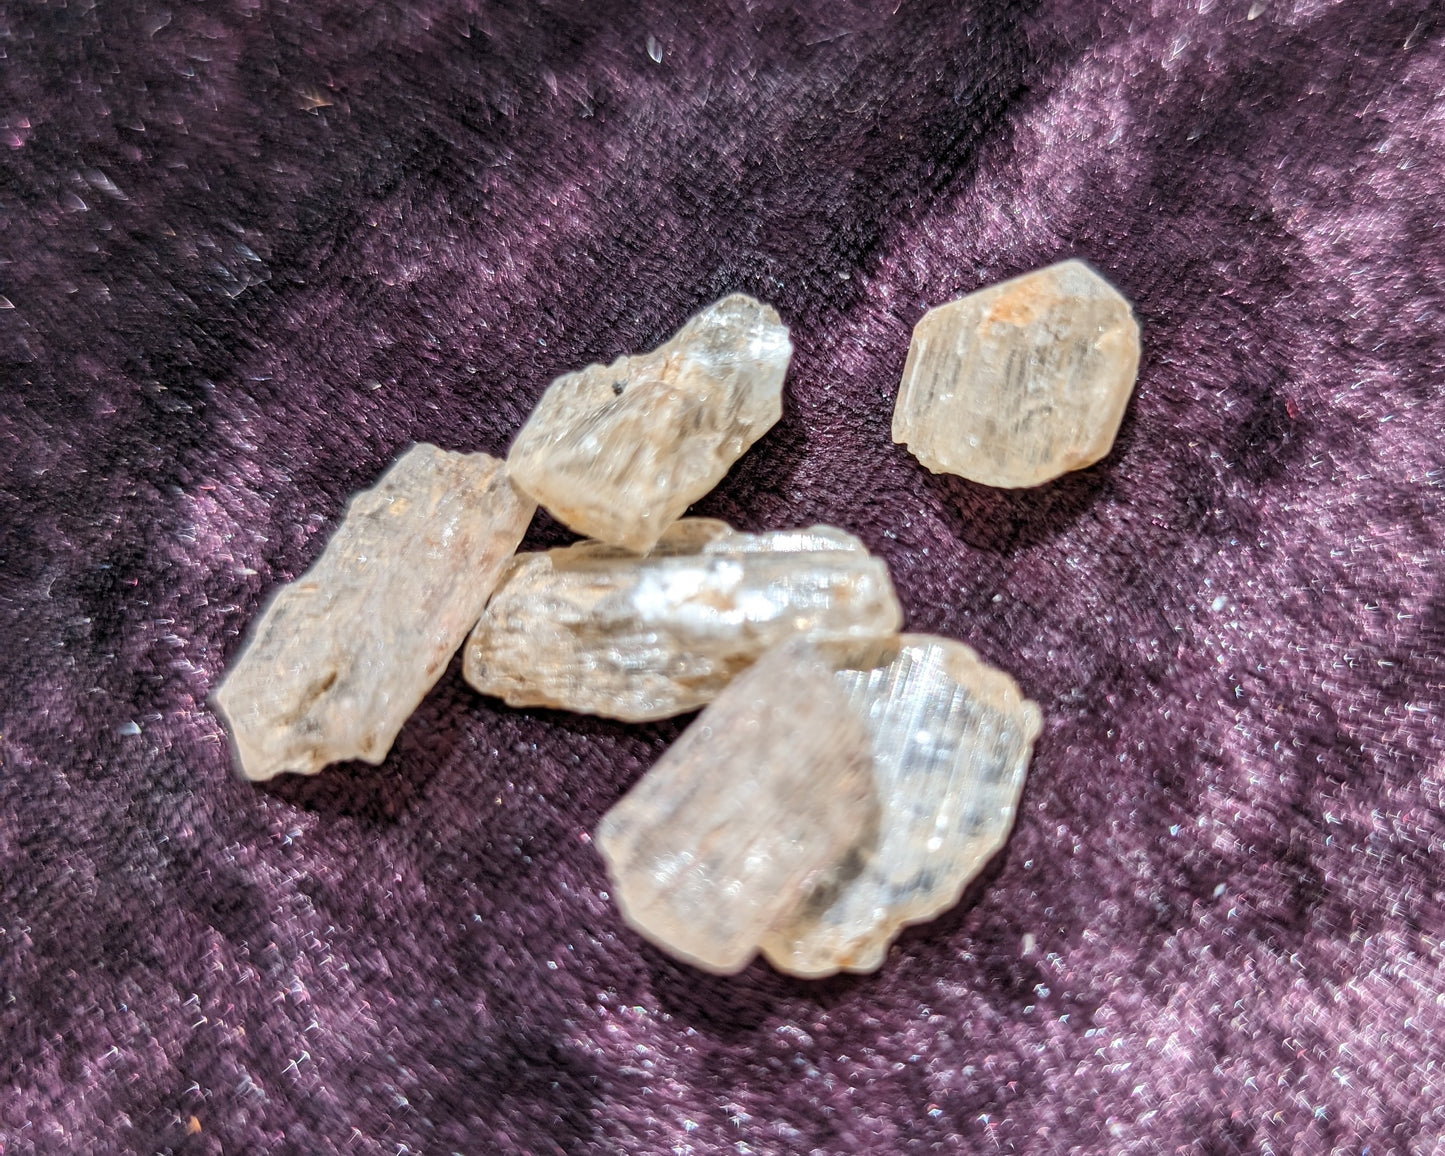 Golden Scapolite from Tanzania 6-8 crystals 7-8g